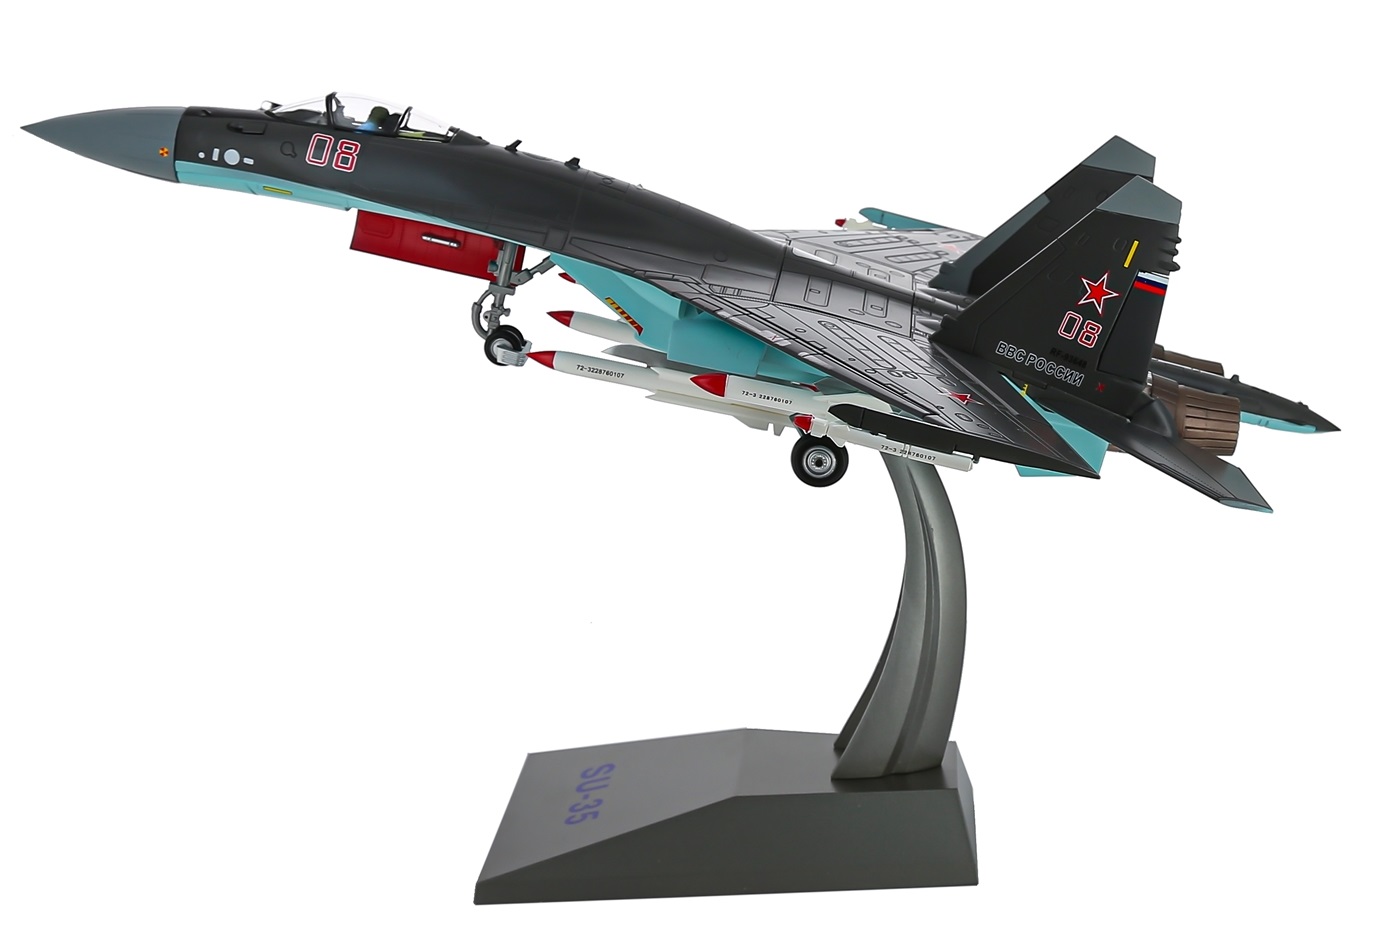       -35    148  47  Large metal model of a Russian Su-35 fighter airplane  scale 148 Length 47 cm